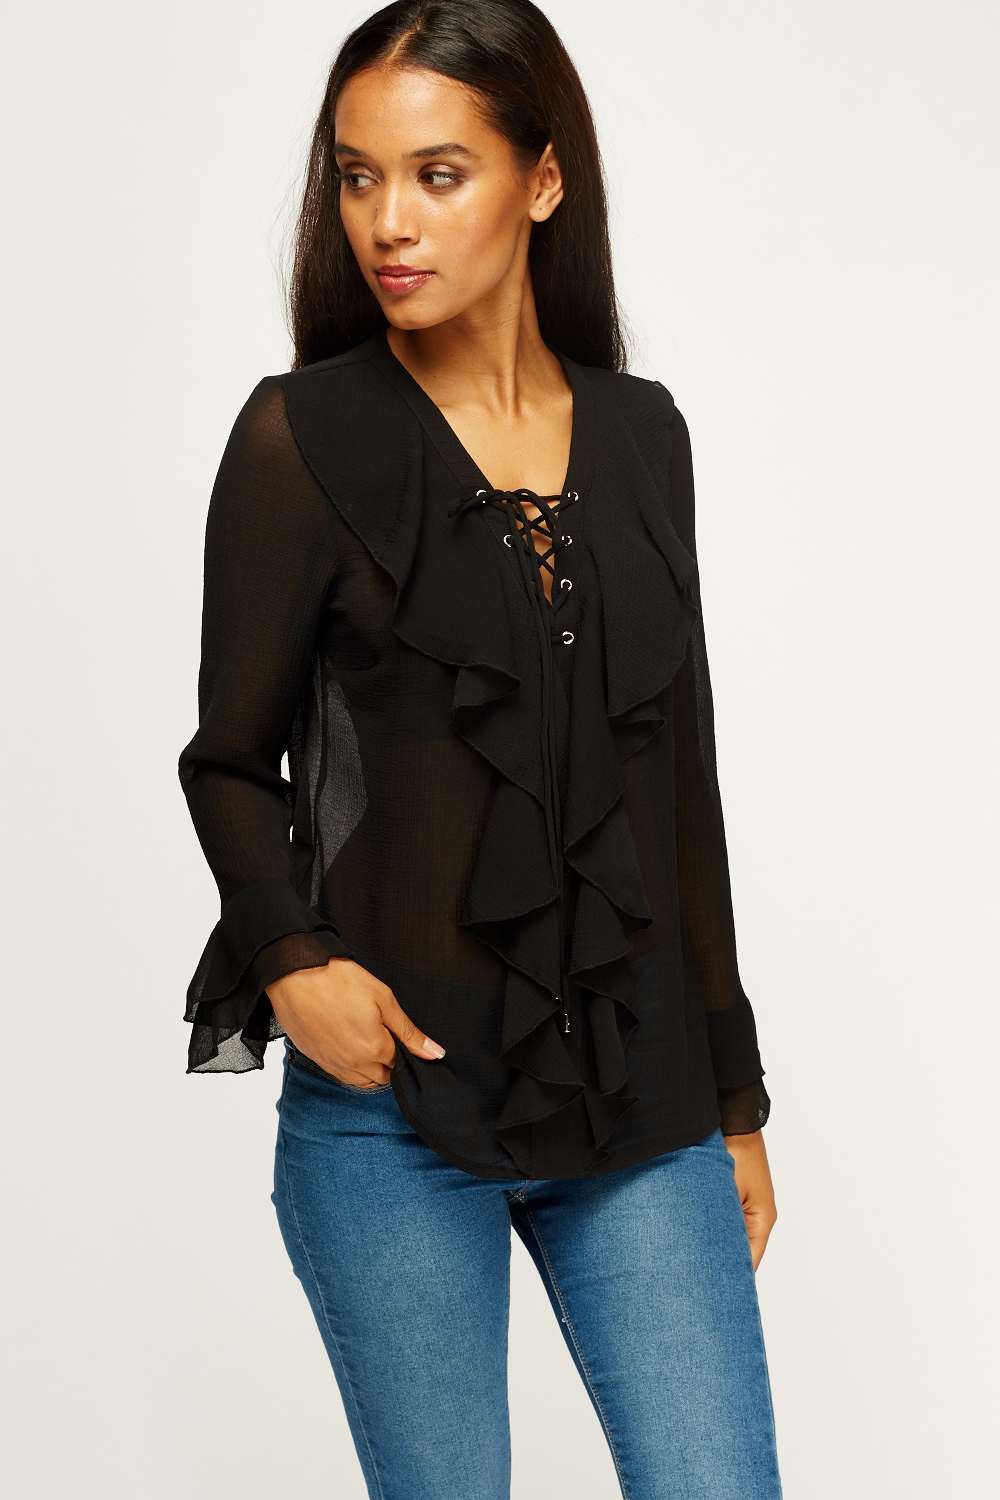 Tie Up Neck Frilled Blouse - Just $7